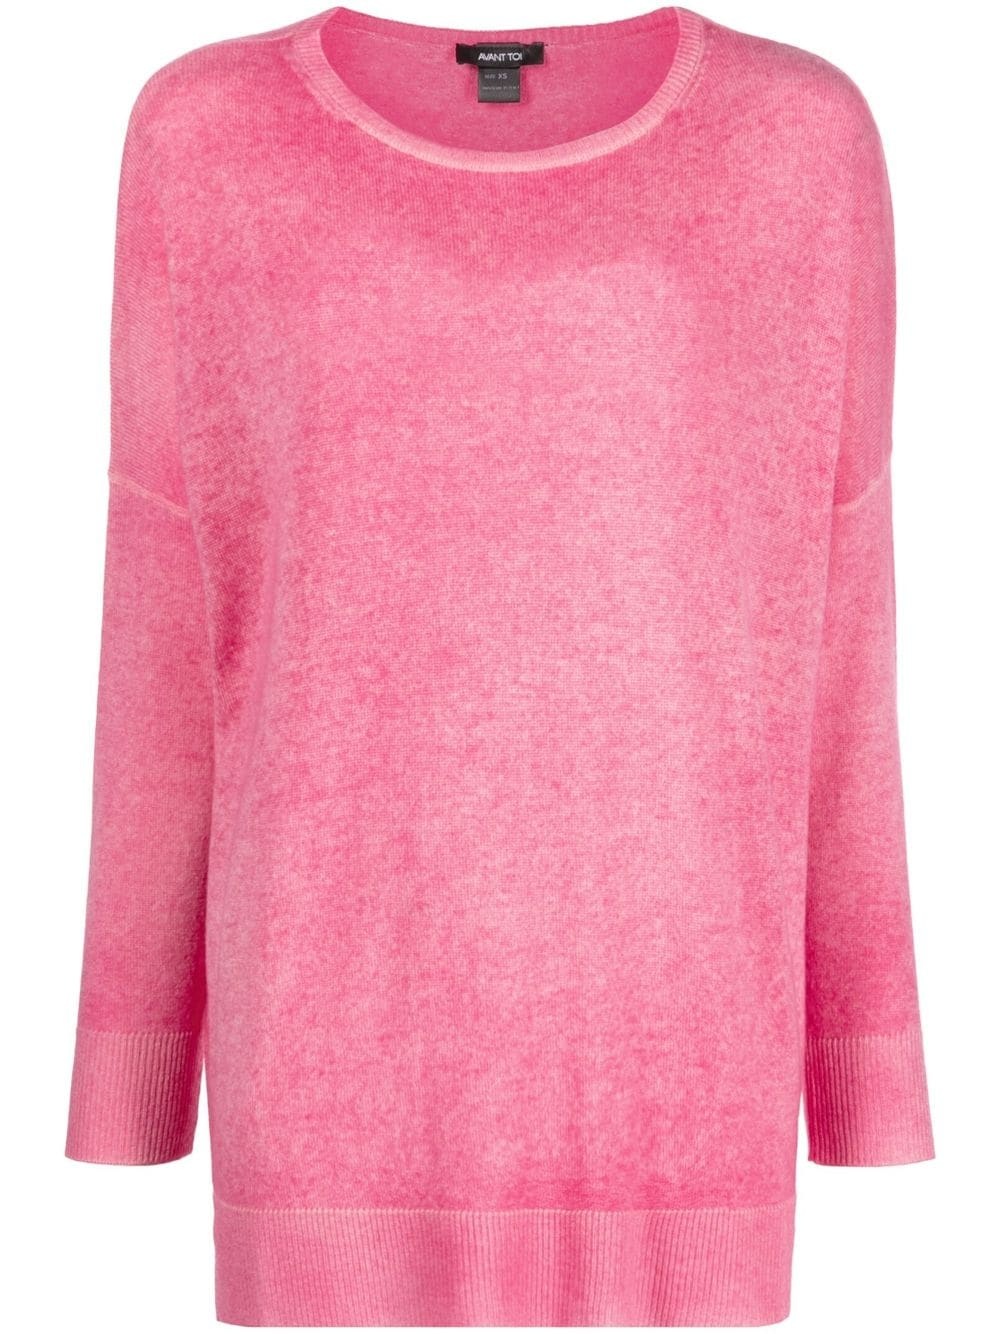 cashmere knitted jumper - 1